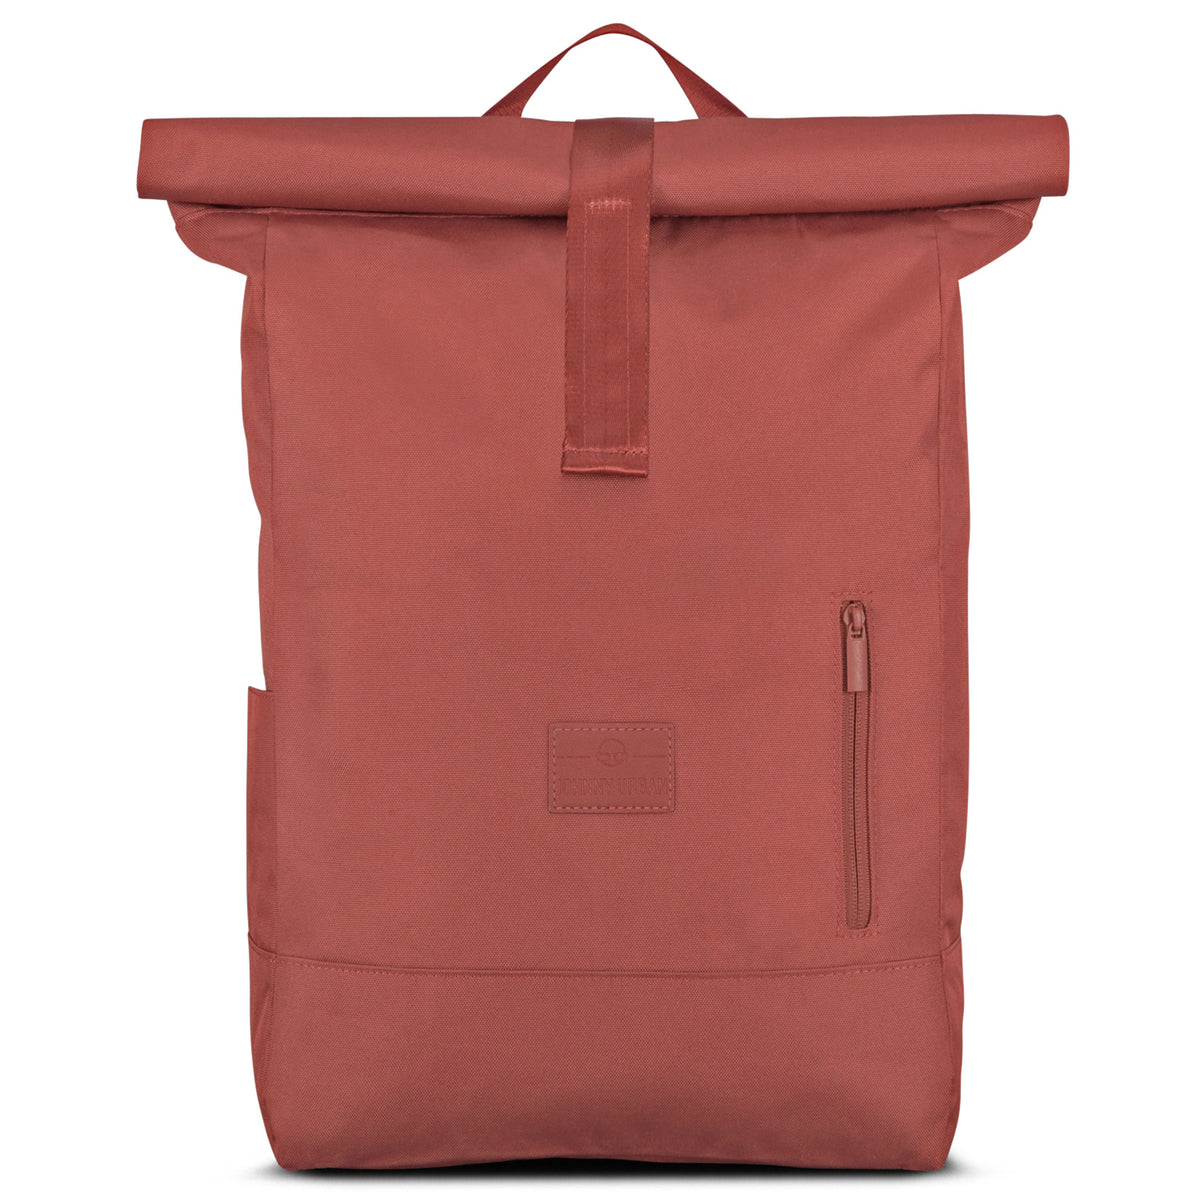 Roll Top Backpack "Robin Large" 